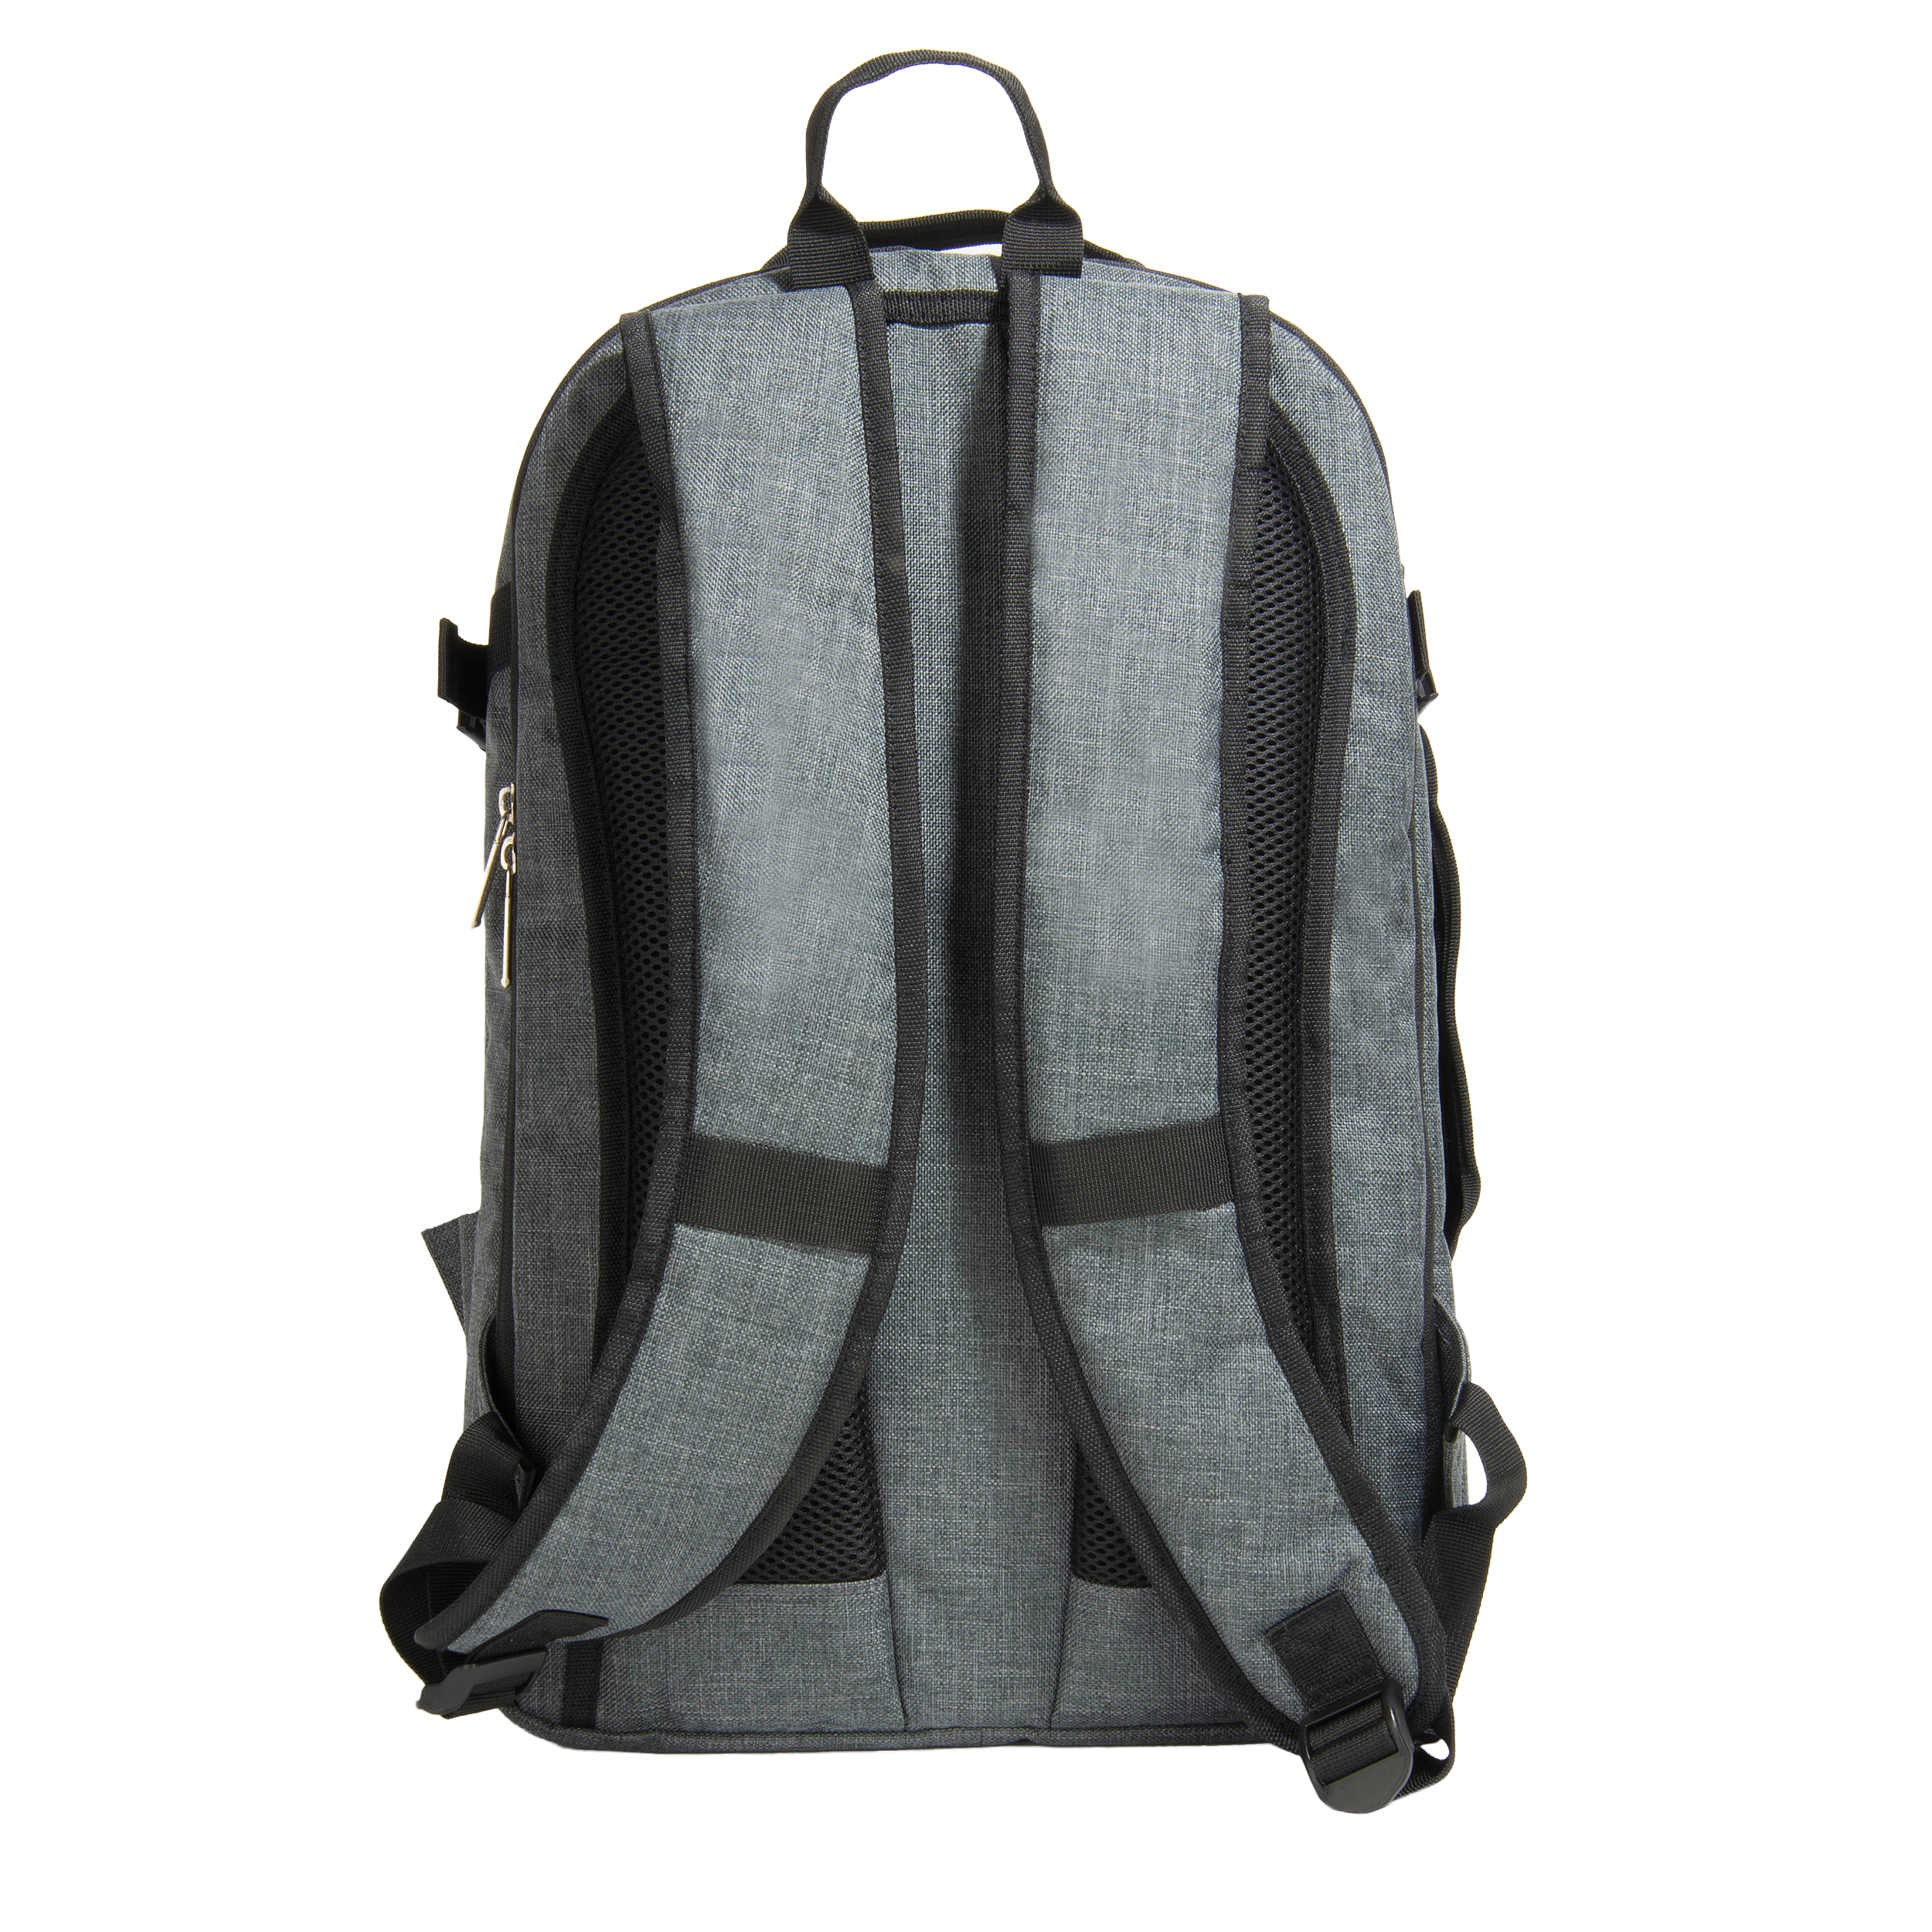 Talaria Travel Business Backpack Fits up to 17.3 I